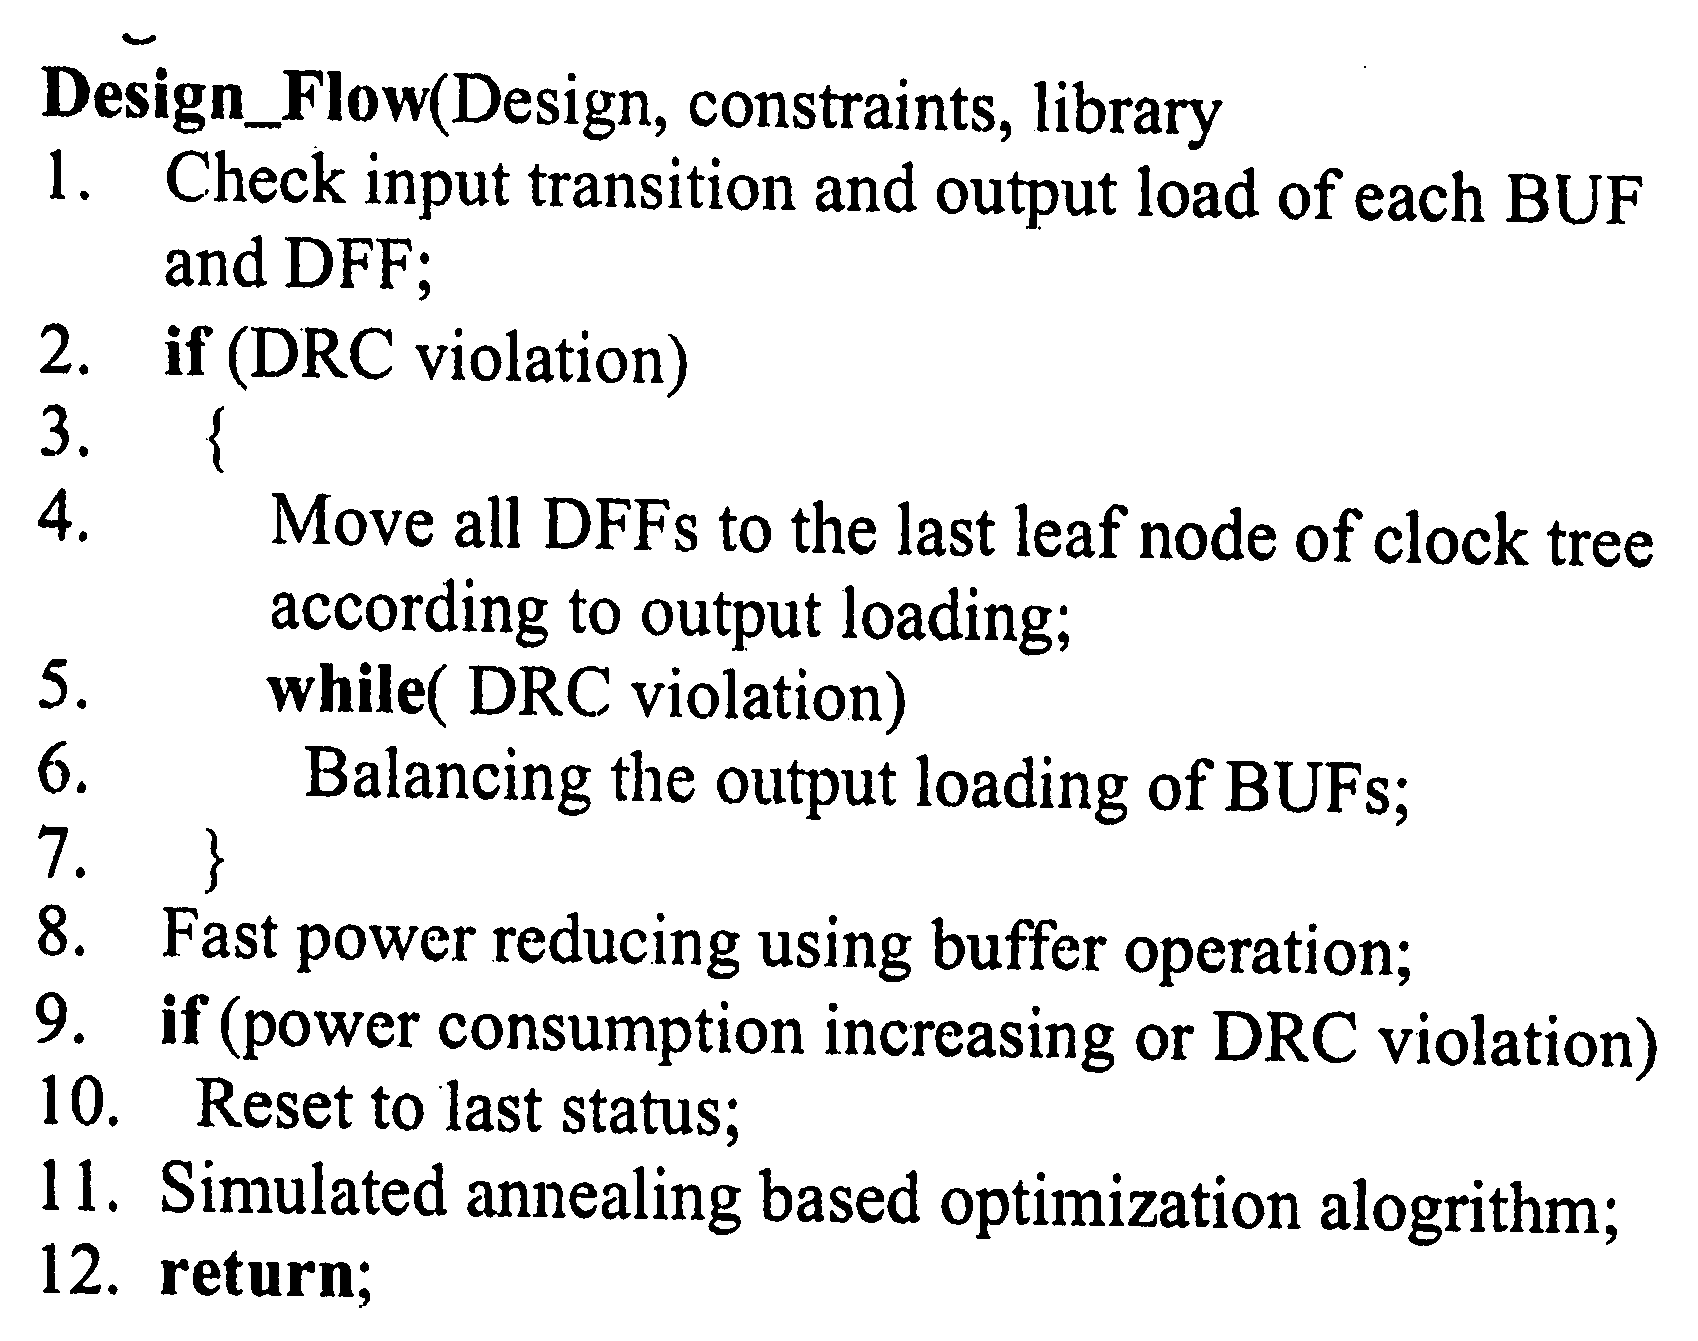 Clock tree synthesis for low power consumption and low clock skew